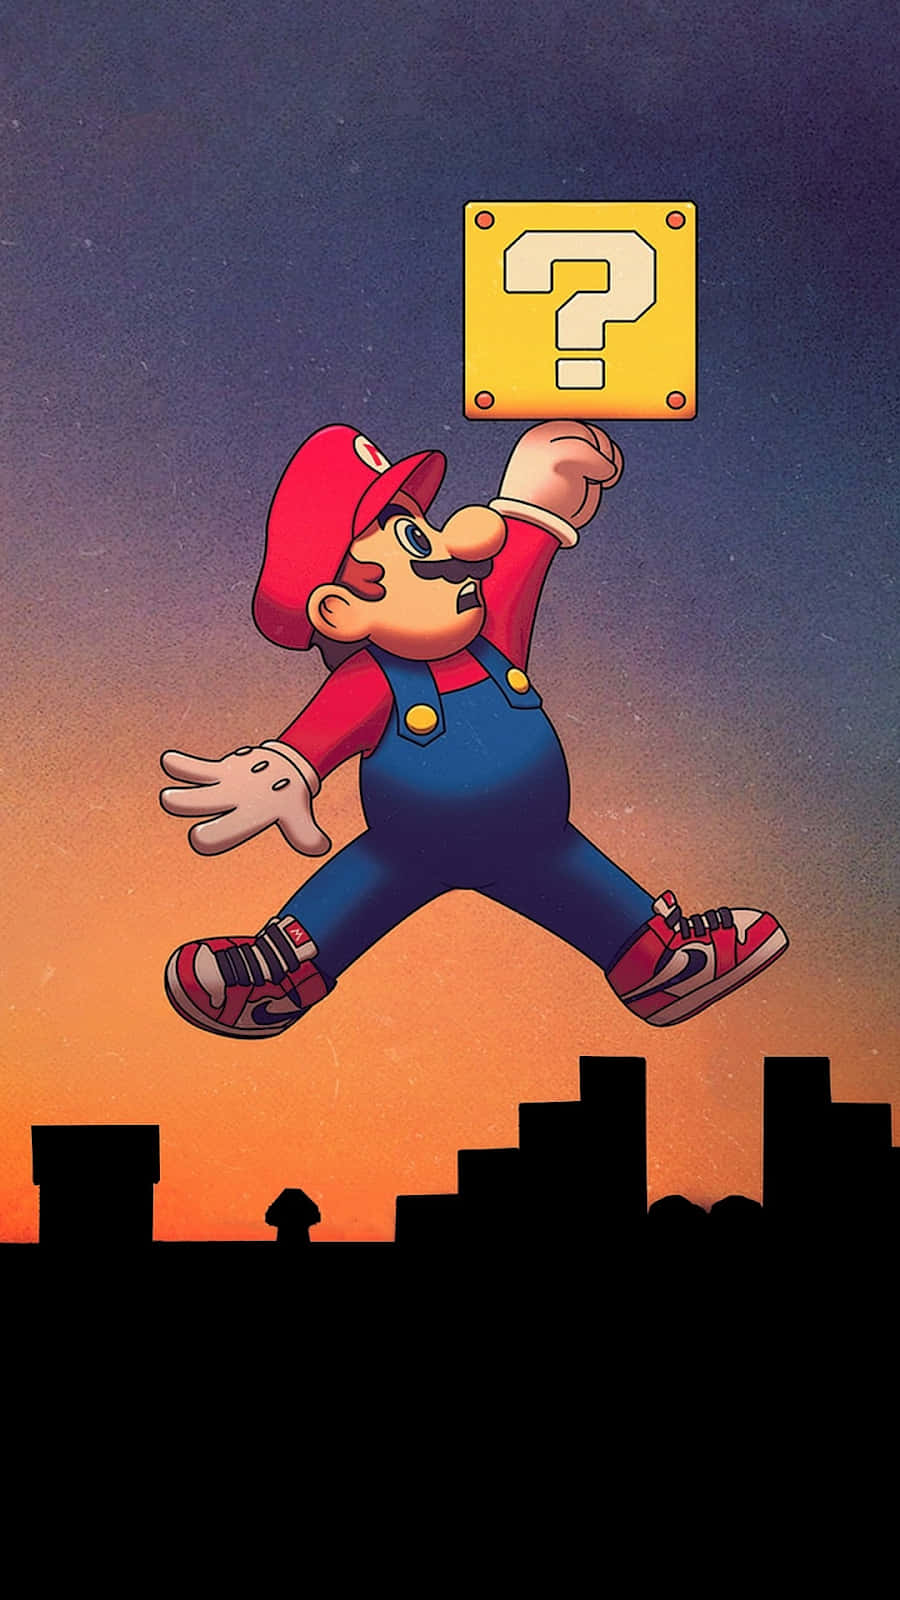 Mario ready to jump off and save the Princess